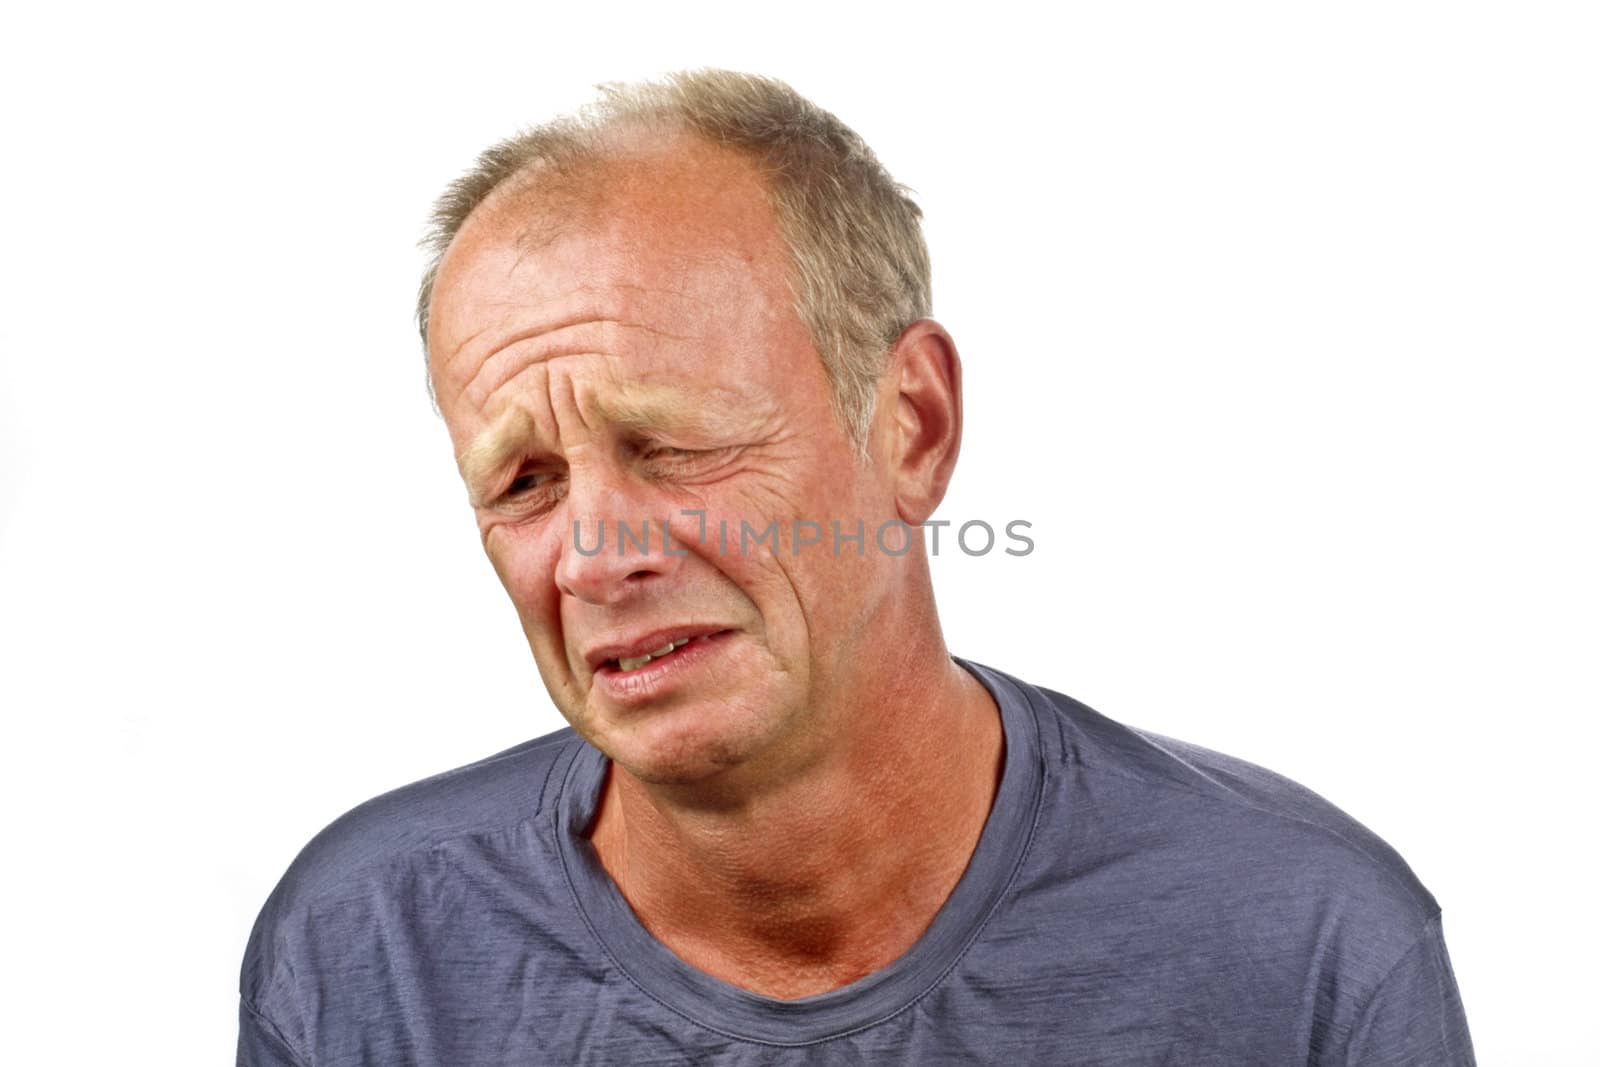 Sad man on a white background by devy